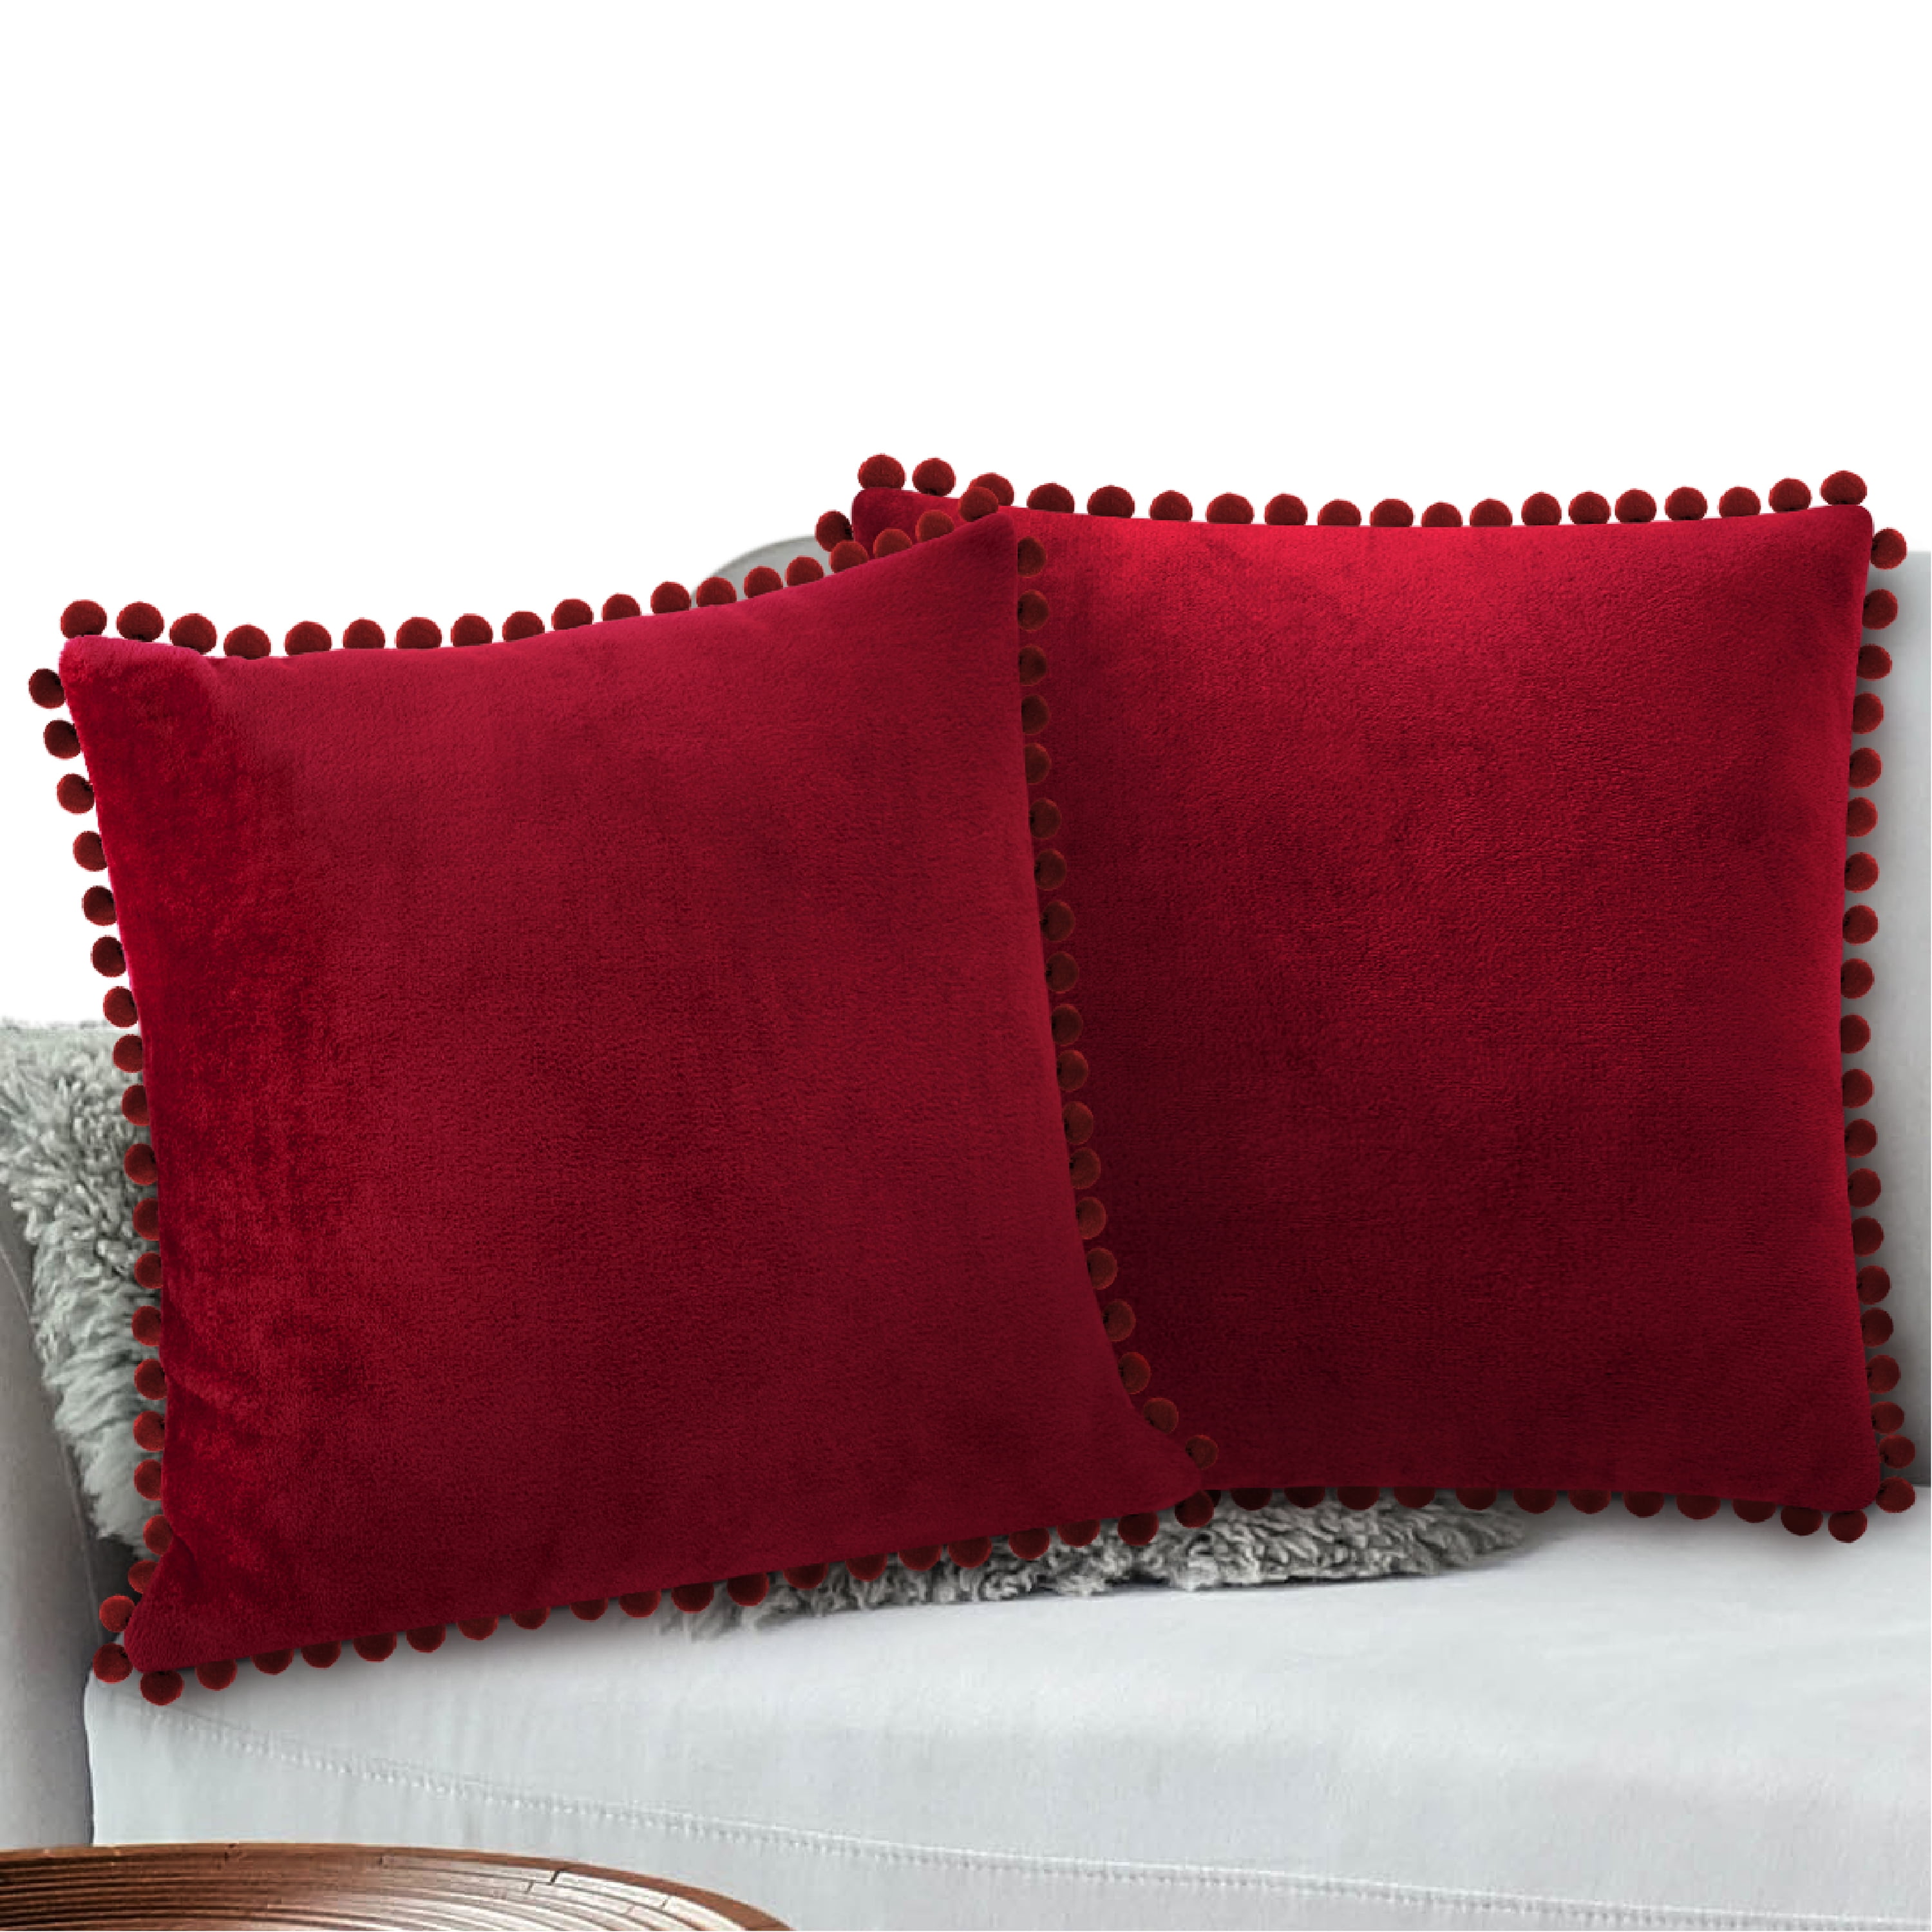 WLNUI Valentines Pillow Covers 18x18 Inch Set of 2 Soft Velvet Burgundy Throw Pillow Covers Square Decorative Cute Pom Poms Cushion Case for Sofa Couch Home Farmhouse Decor